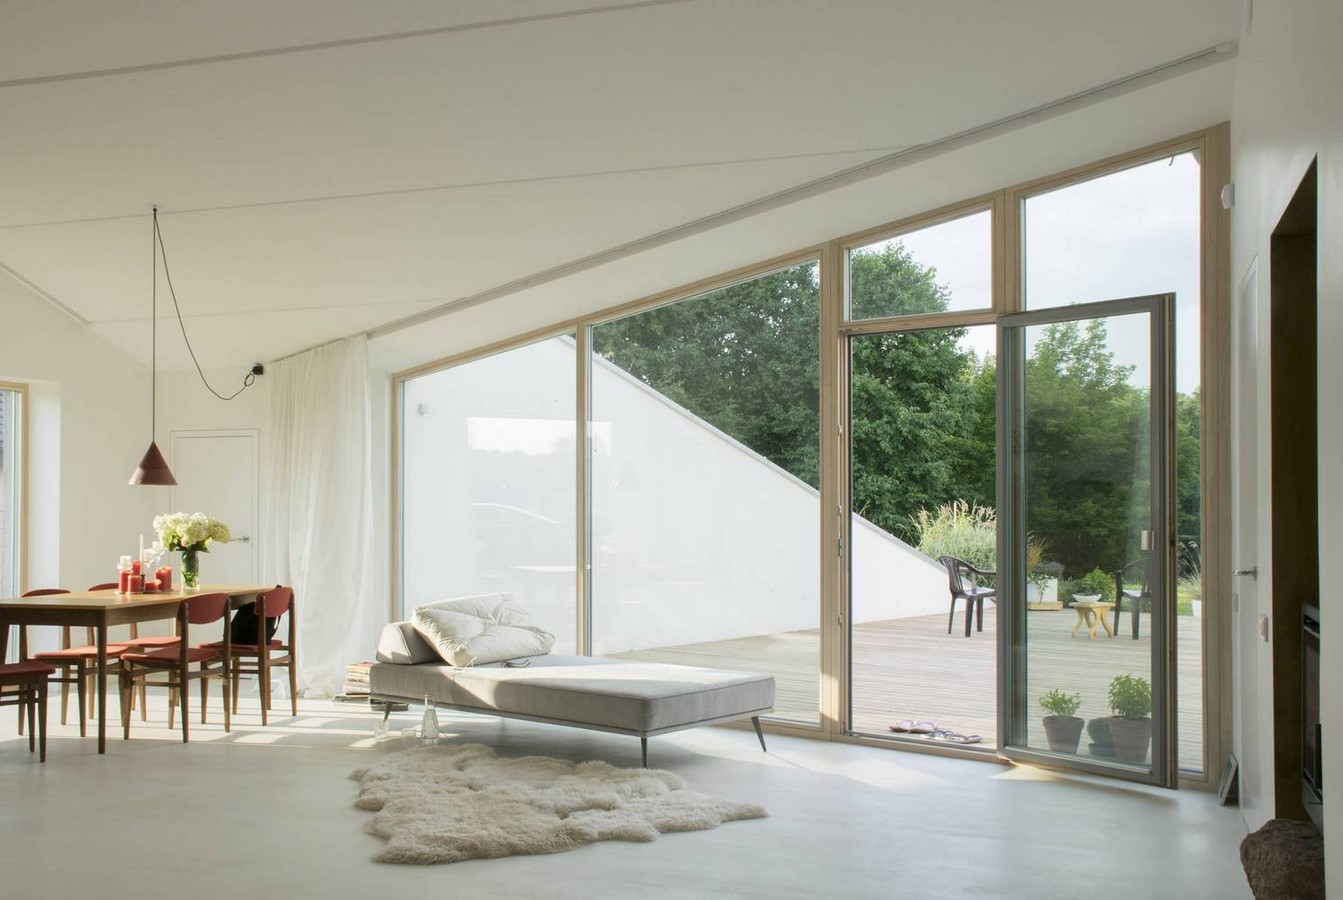 15 examples of white interiors - Sheet25